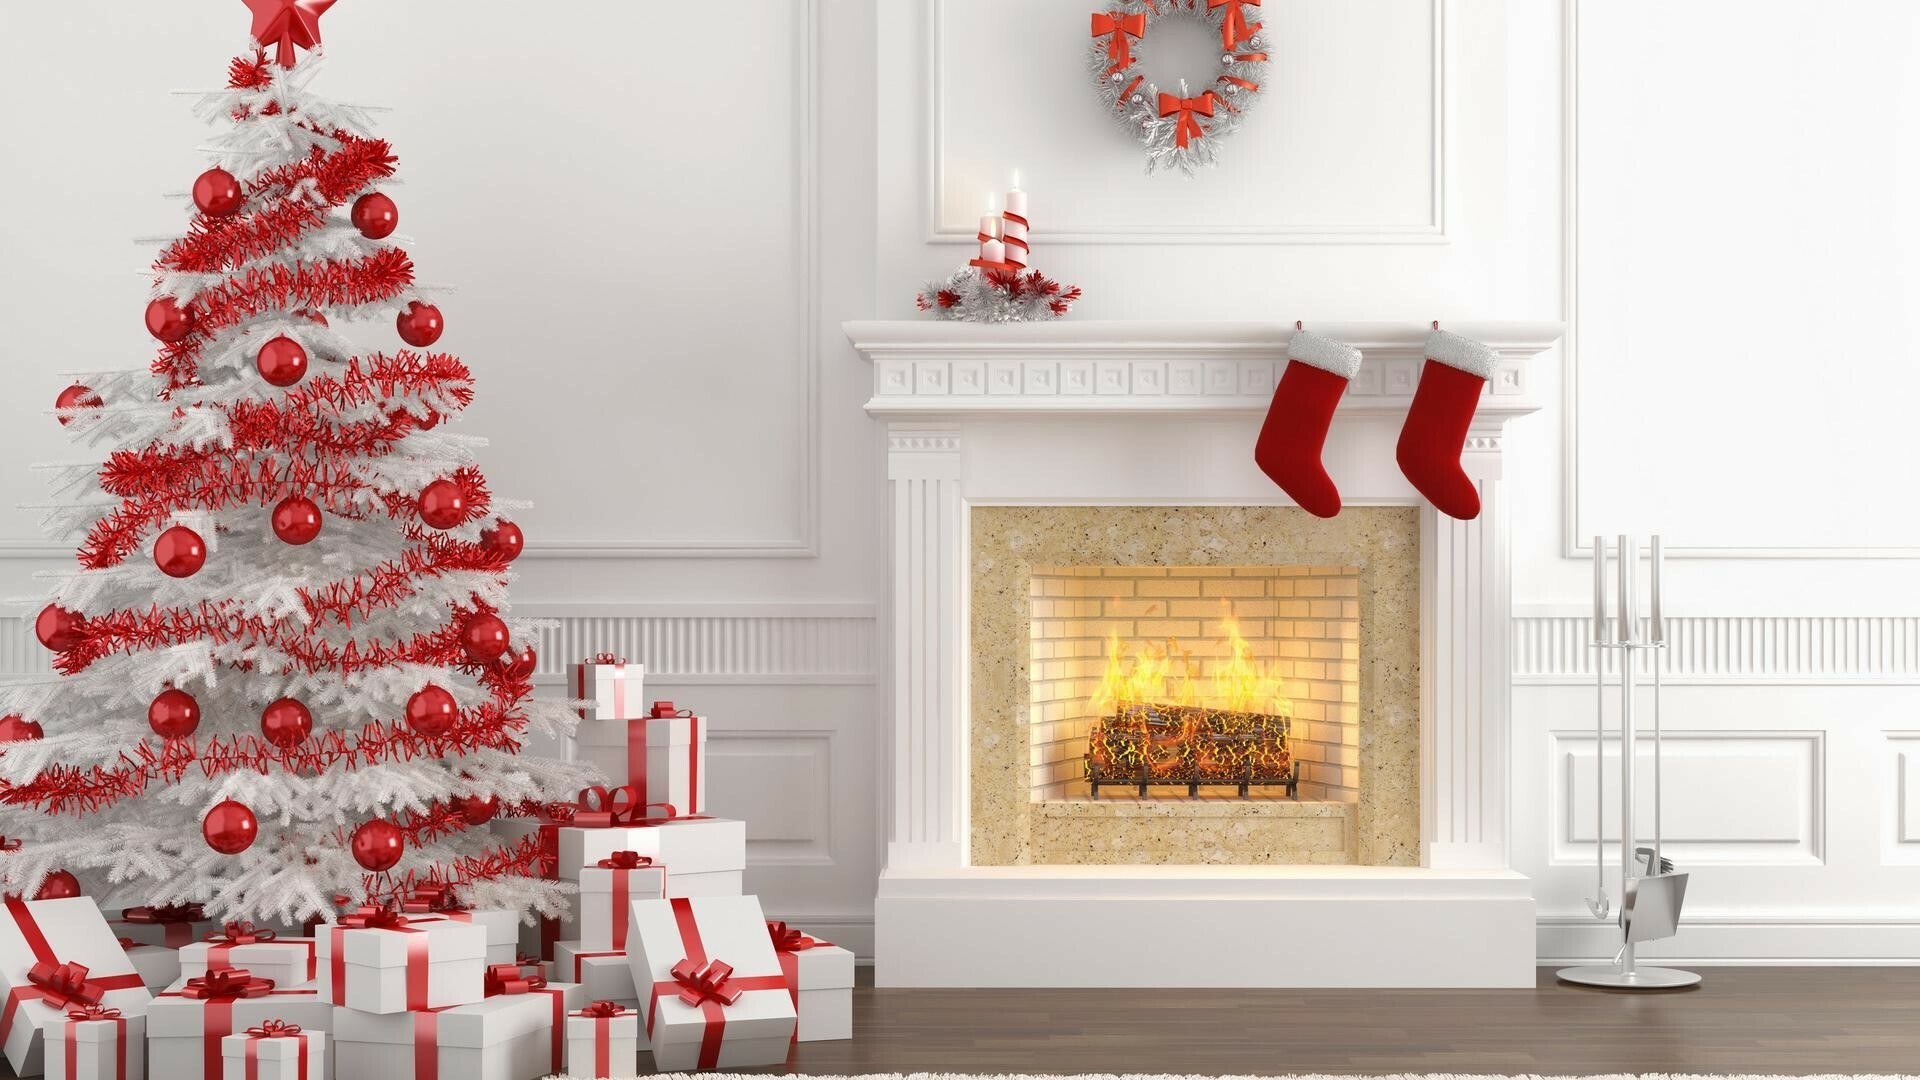 Christmas Fireplace: Red and white style decorations, A mountain of gifts, Chimney. 1920x1080 Full HD Wallpaper.